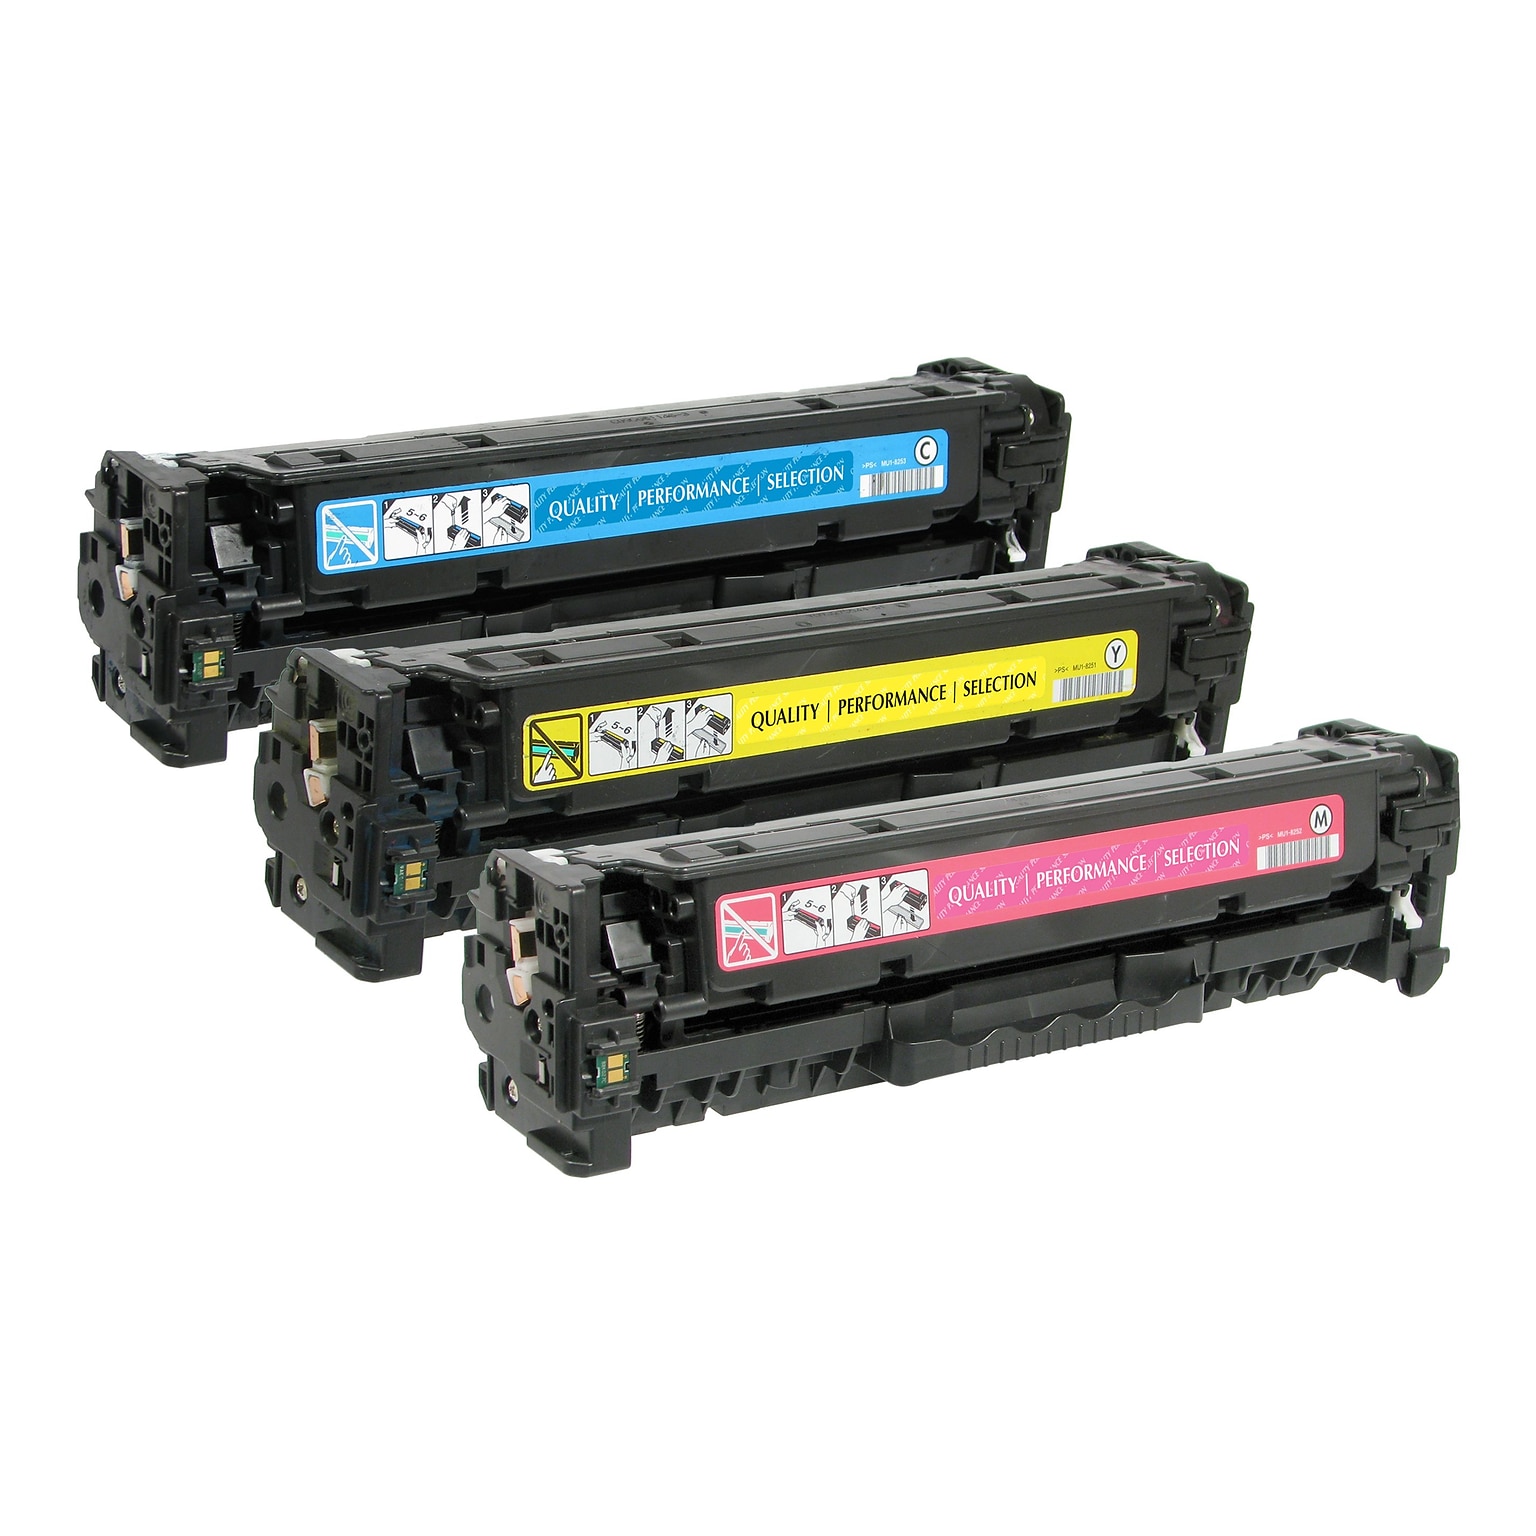 Quill Brand® Remanufactured Cyan/Magenta/Yellow Standard Yield Toner Cartridge Replacement for HP 305A (CF370AM), 3/Pack